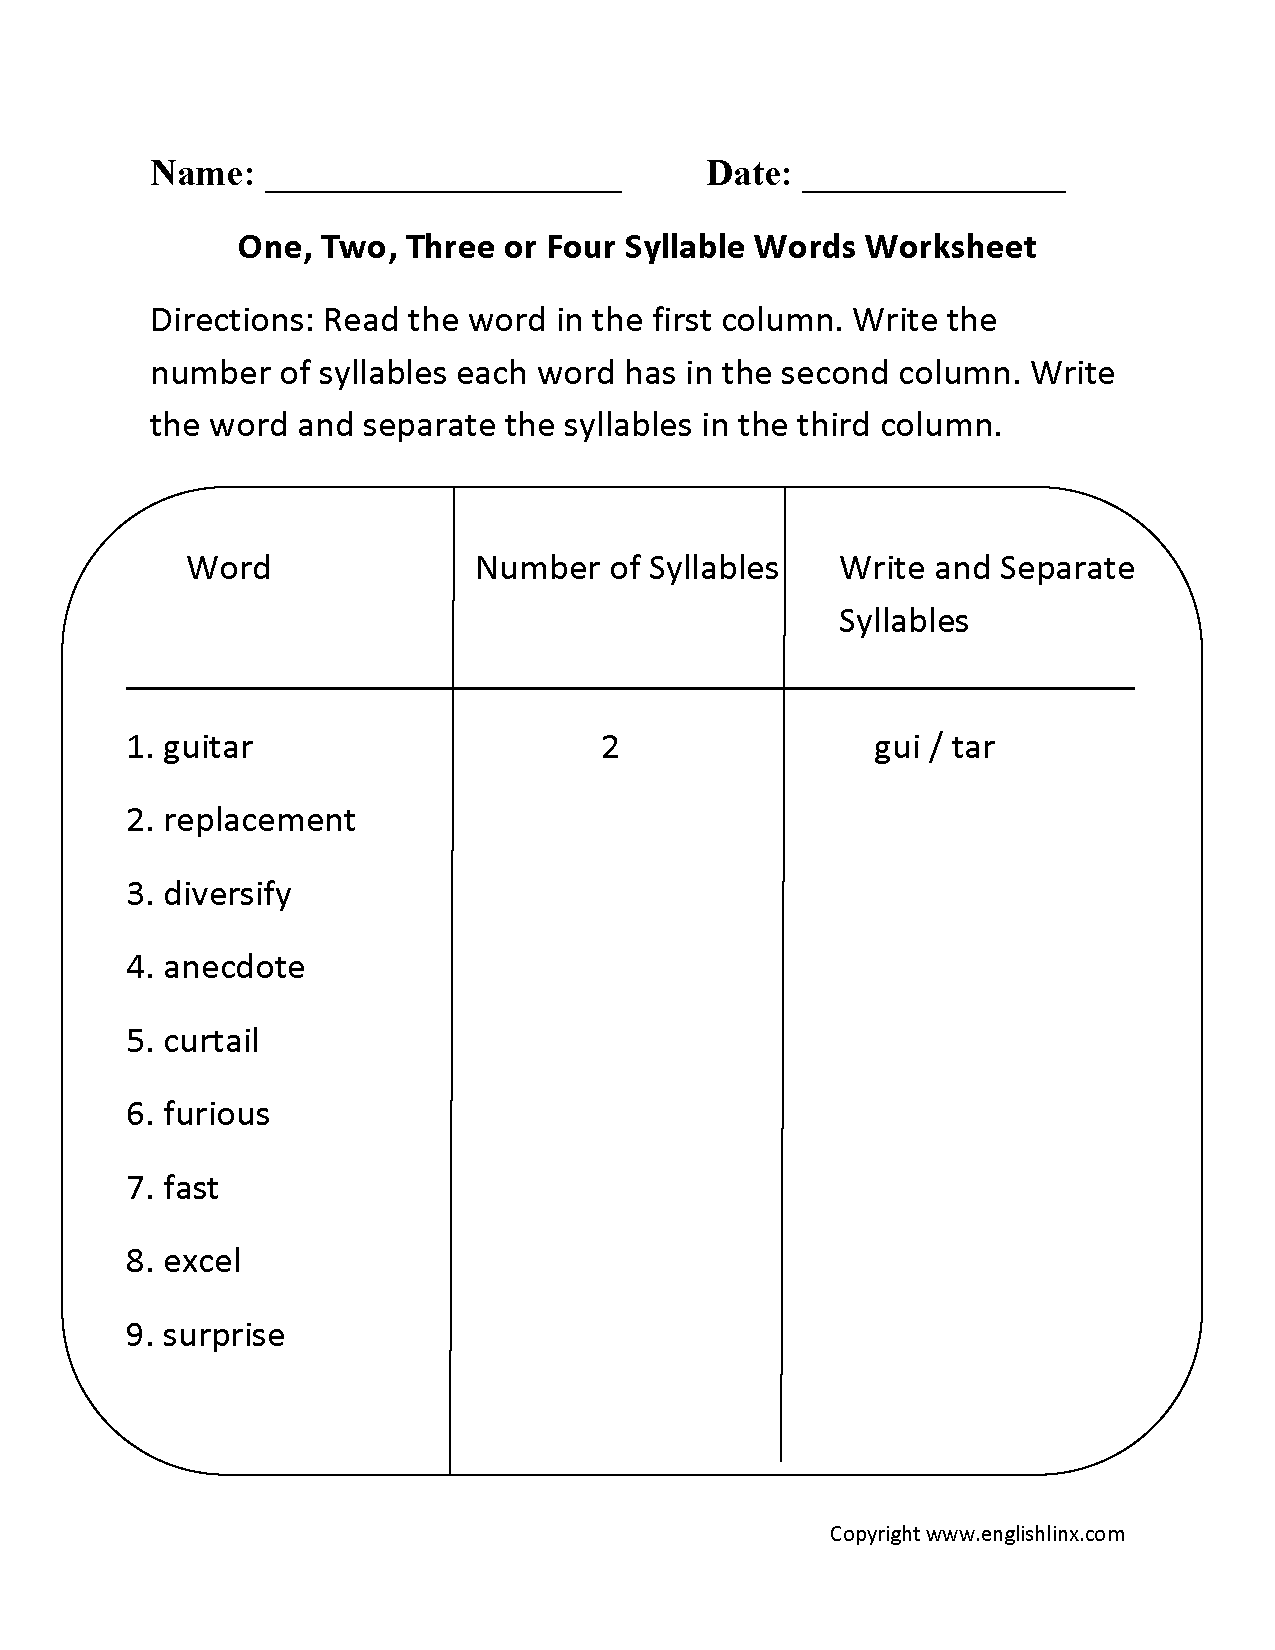 One, Two, Three or Four Syllable Words Worksheet